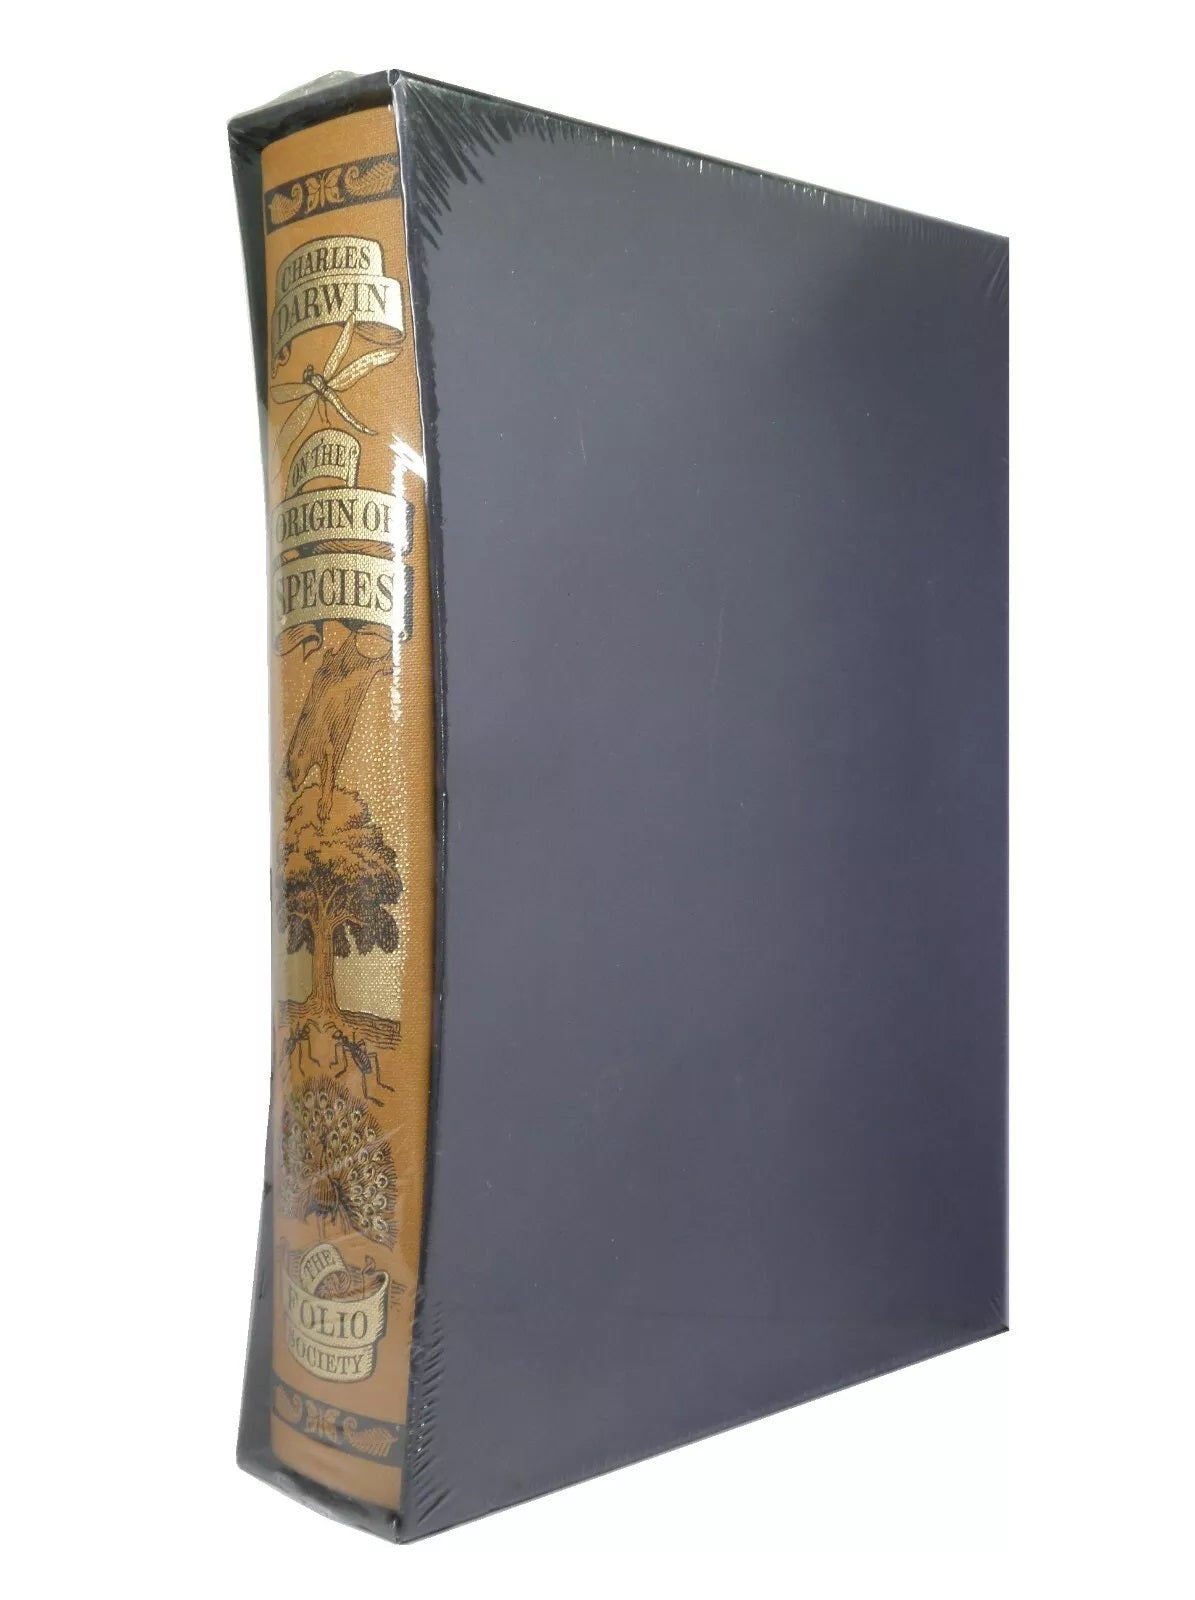 ON THE ORIGIN OF SPECIES BY CHARLES DARWIN, FOLIO SOCIETY, NEW & SEALED